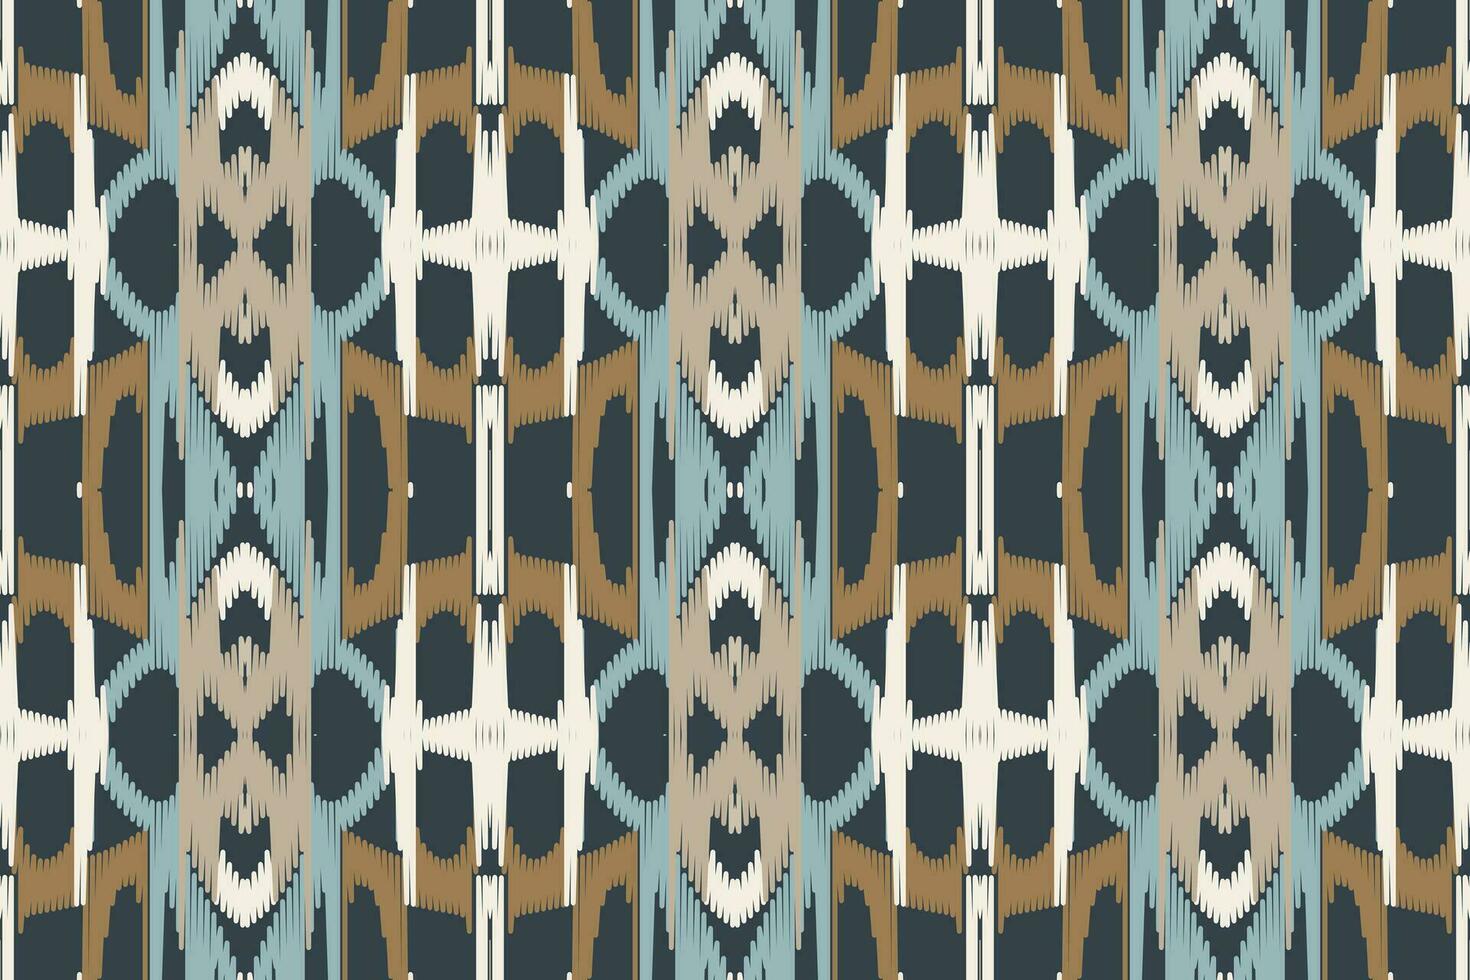 Ikat Seamless Pattern Embroidery Background. Ikat Triangle Geometric Ethnic Oriental Pattern traditional.aztec Style Abstract Vector design for Texture,fabric,clothing,wrapping,sarong.